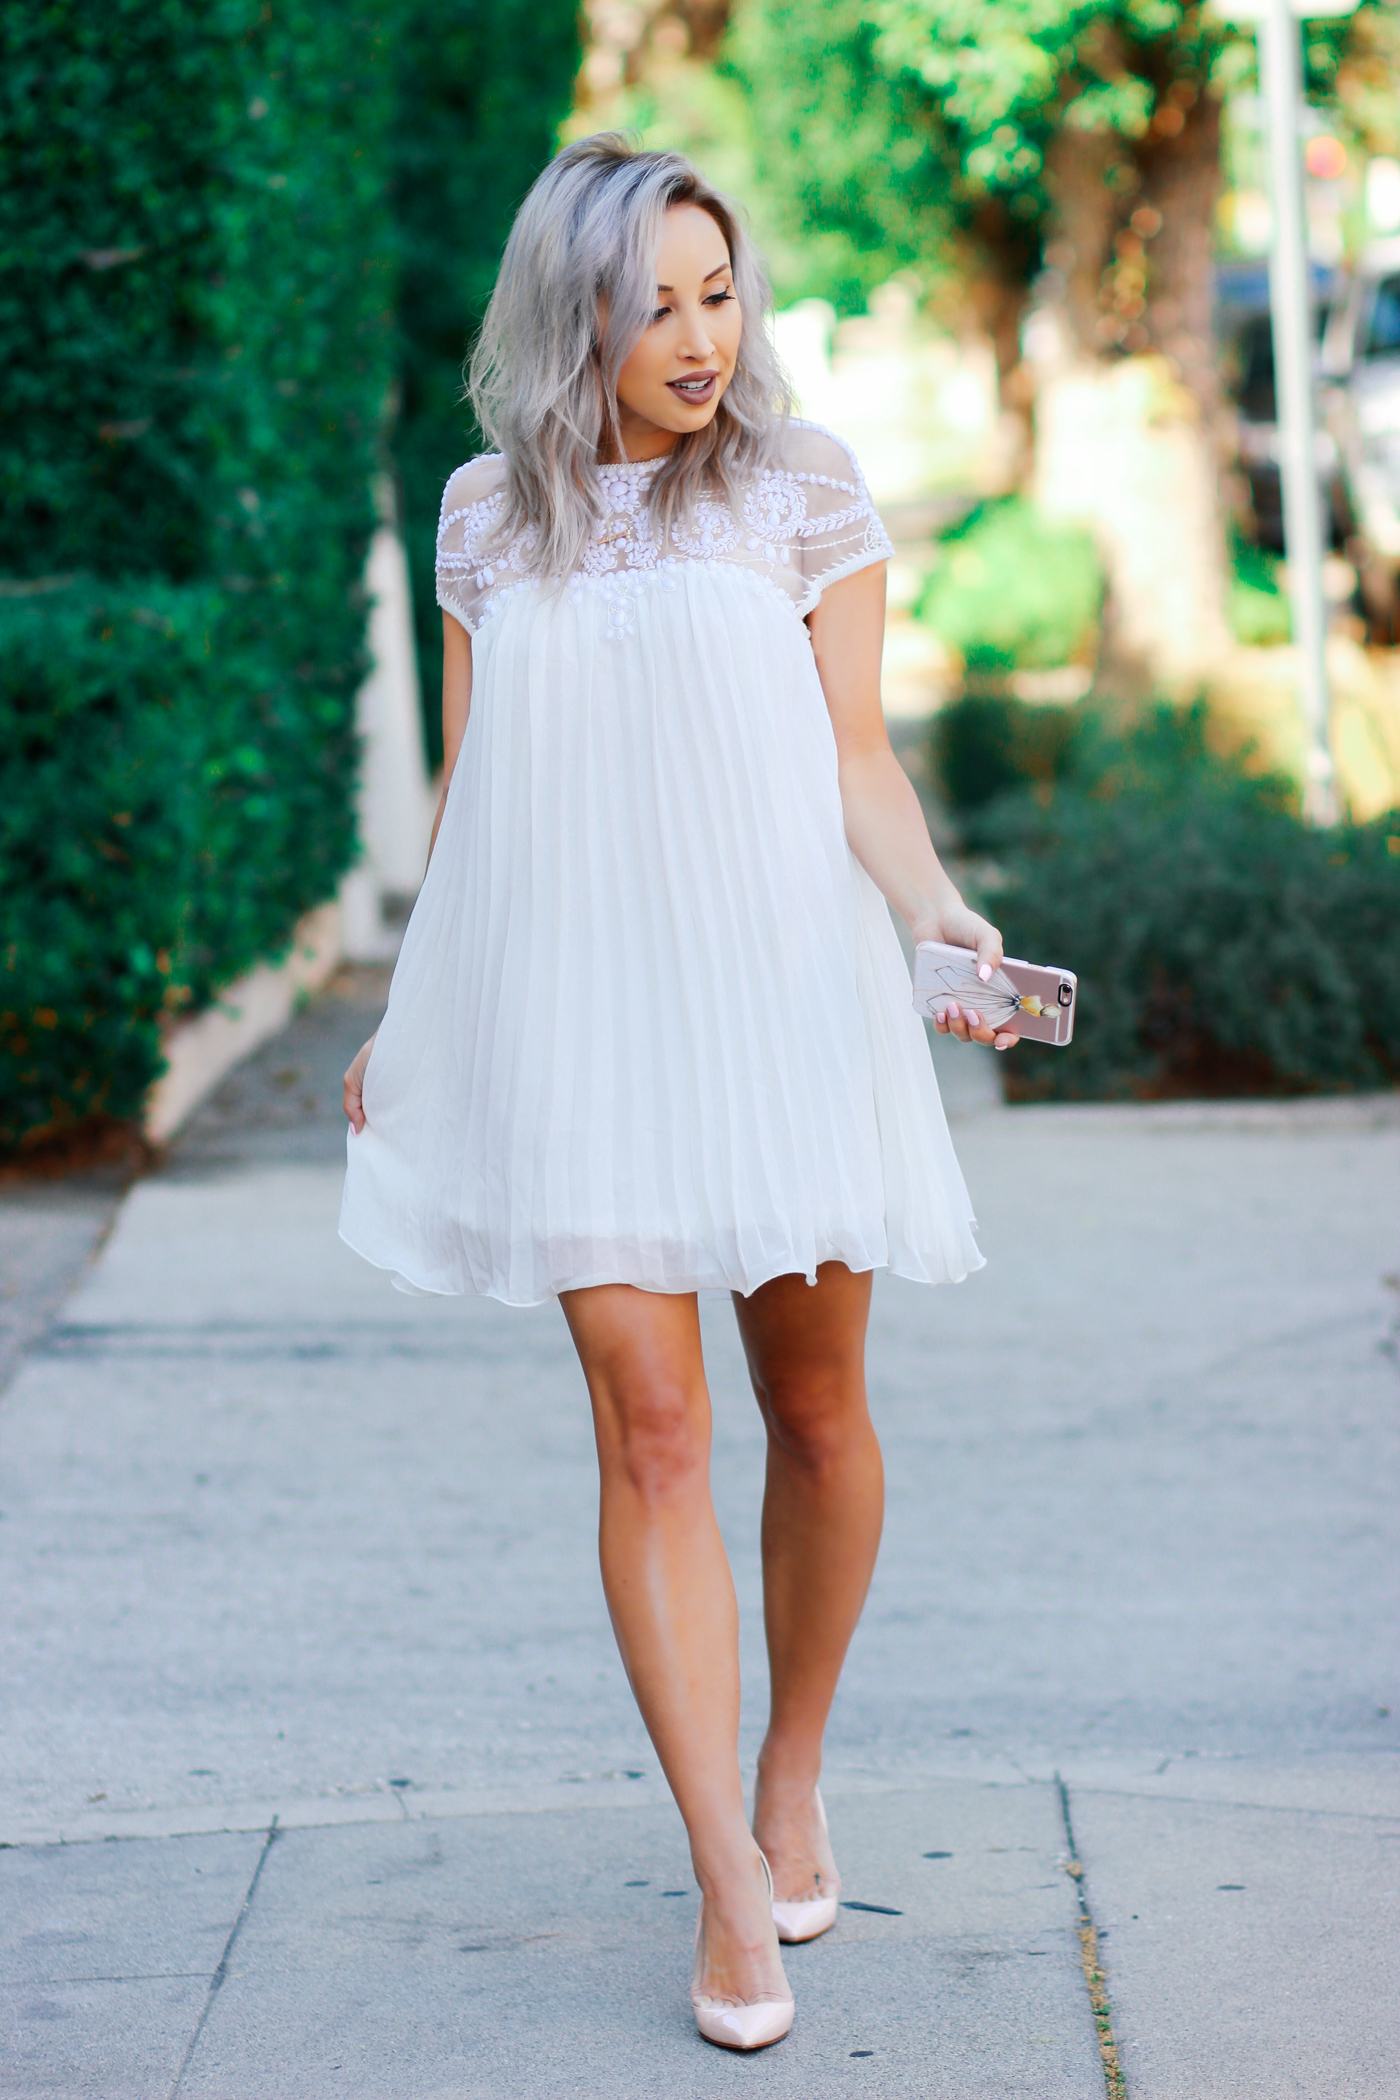 Blondie in the City | White Beaded BabyDoll Dress @Chicwish | Bridal Shower Dress | Bachelorette Party Dress